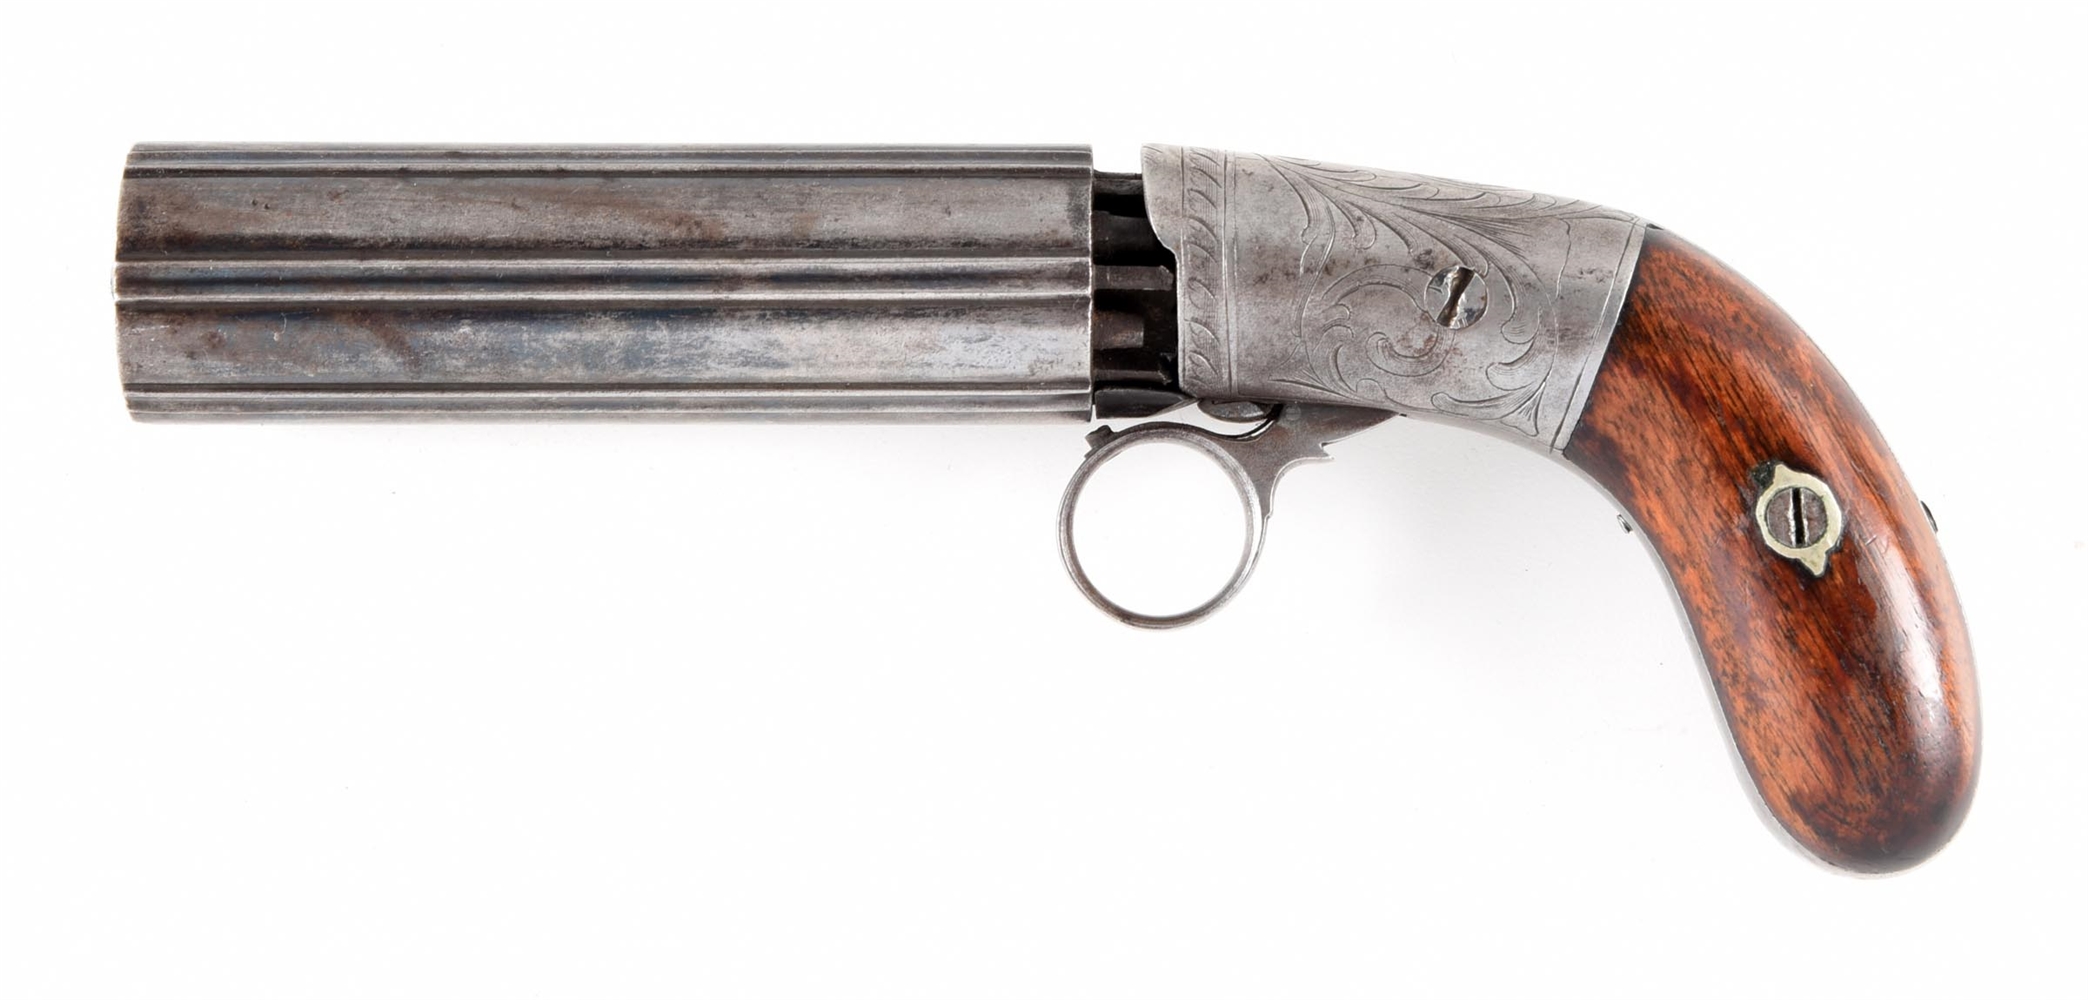 (A) RING TRIGGER HAMMERLESS PERCUSSION PEPPERBOX REVOLVER.